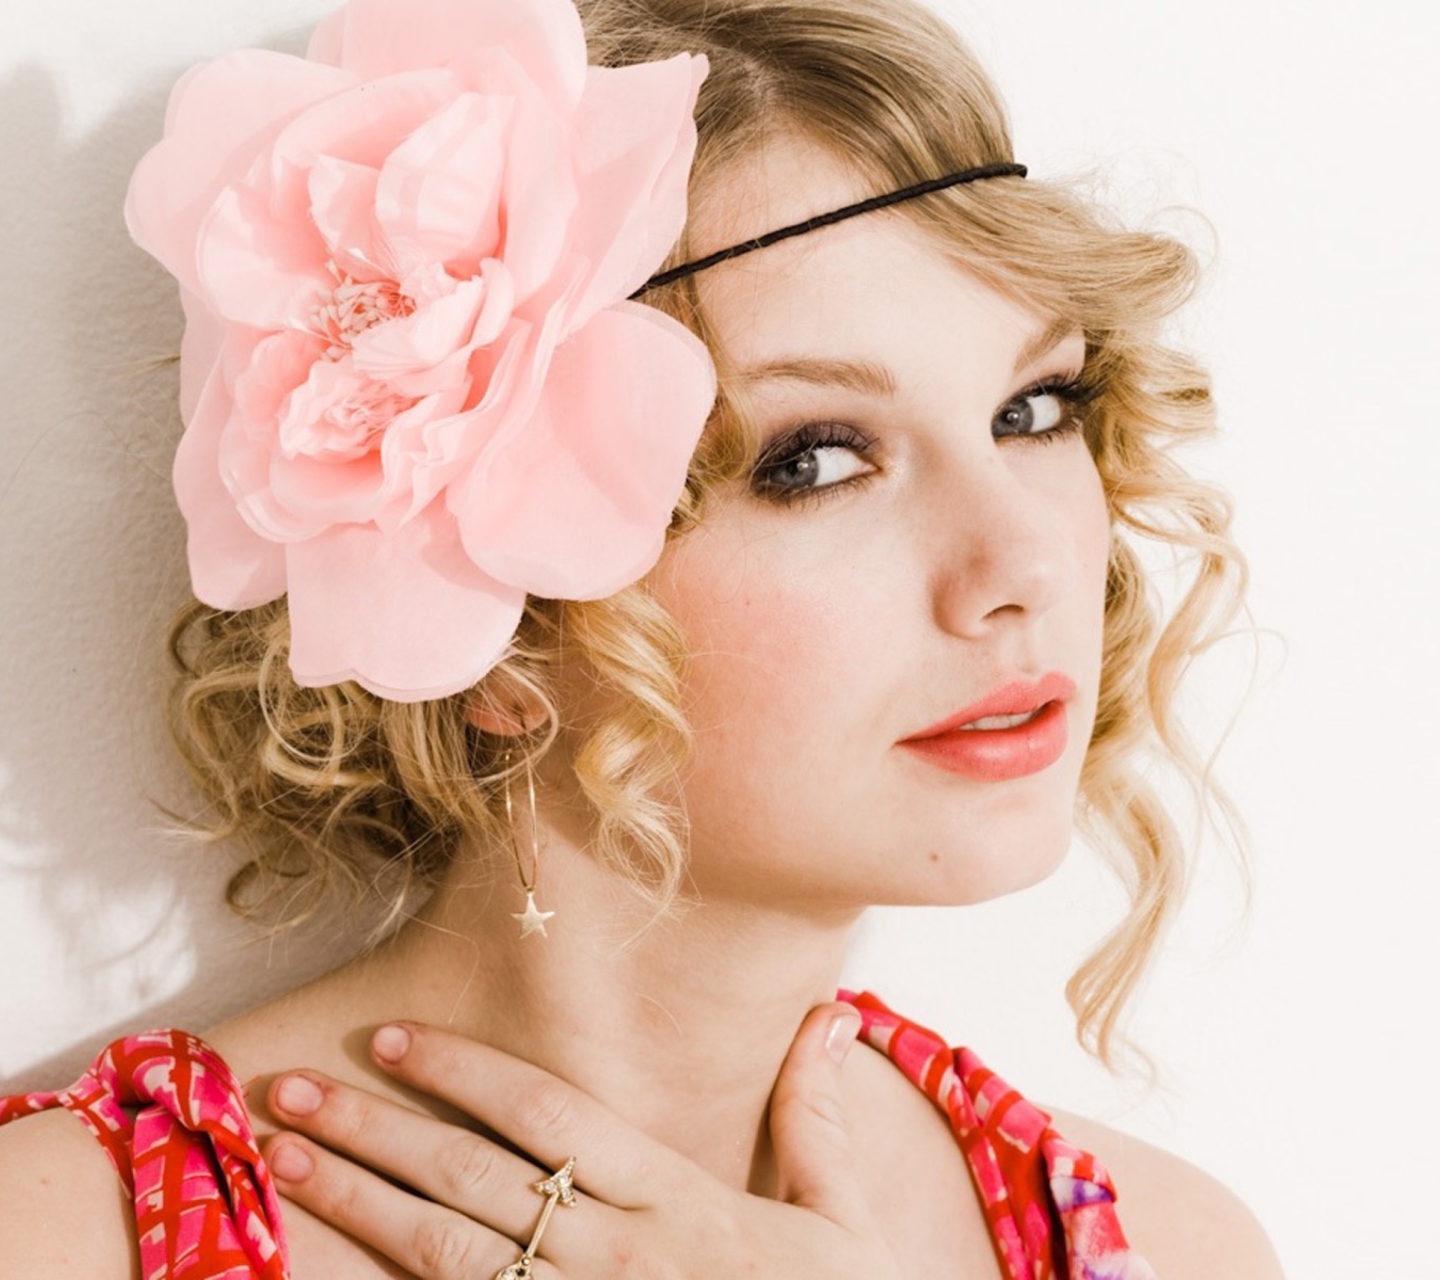 Taylor Swift With Pink Rose On Head wallpaper 1440x1280